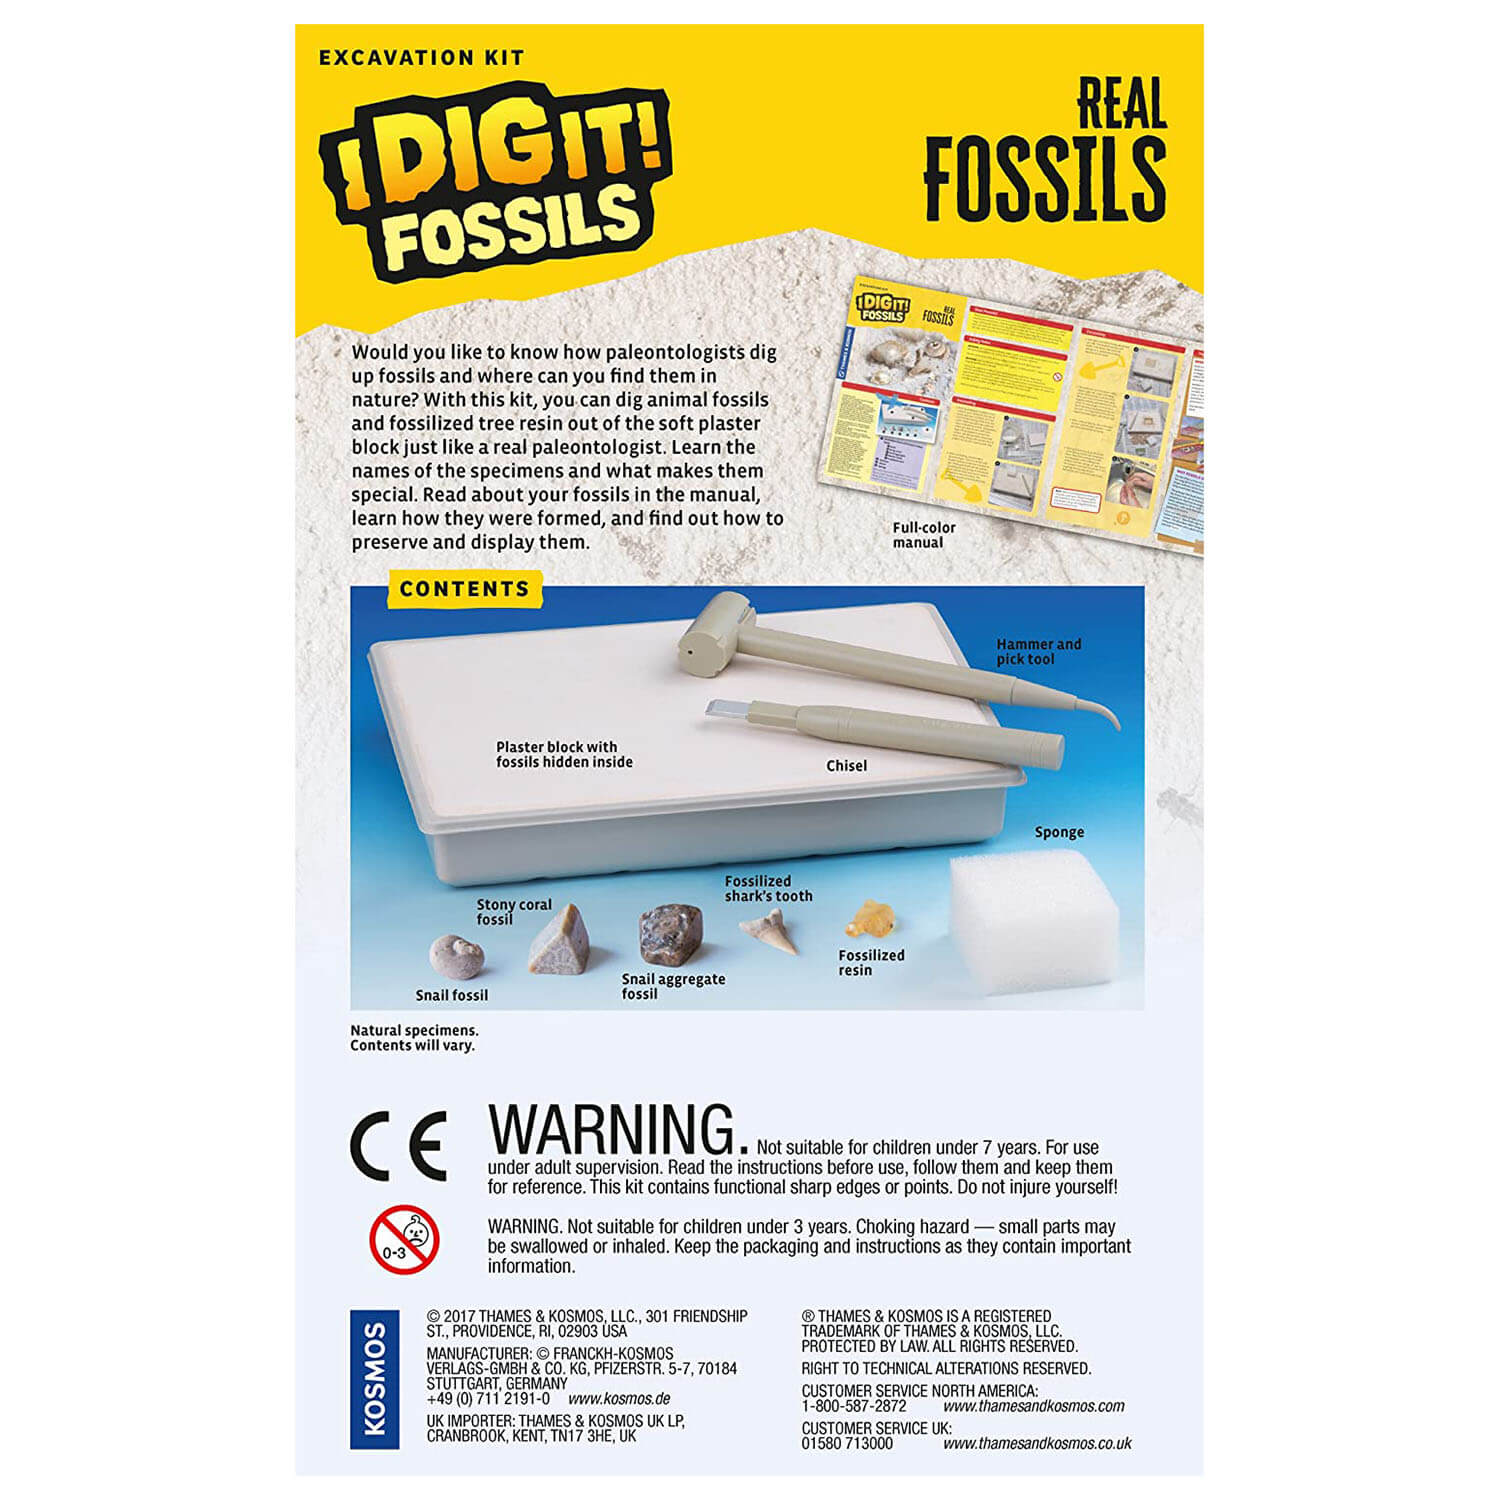 Thames and Kosmos I Dig It! Fossils - Real Fossils Excavation Kit